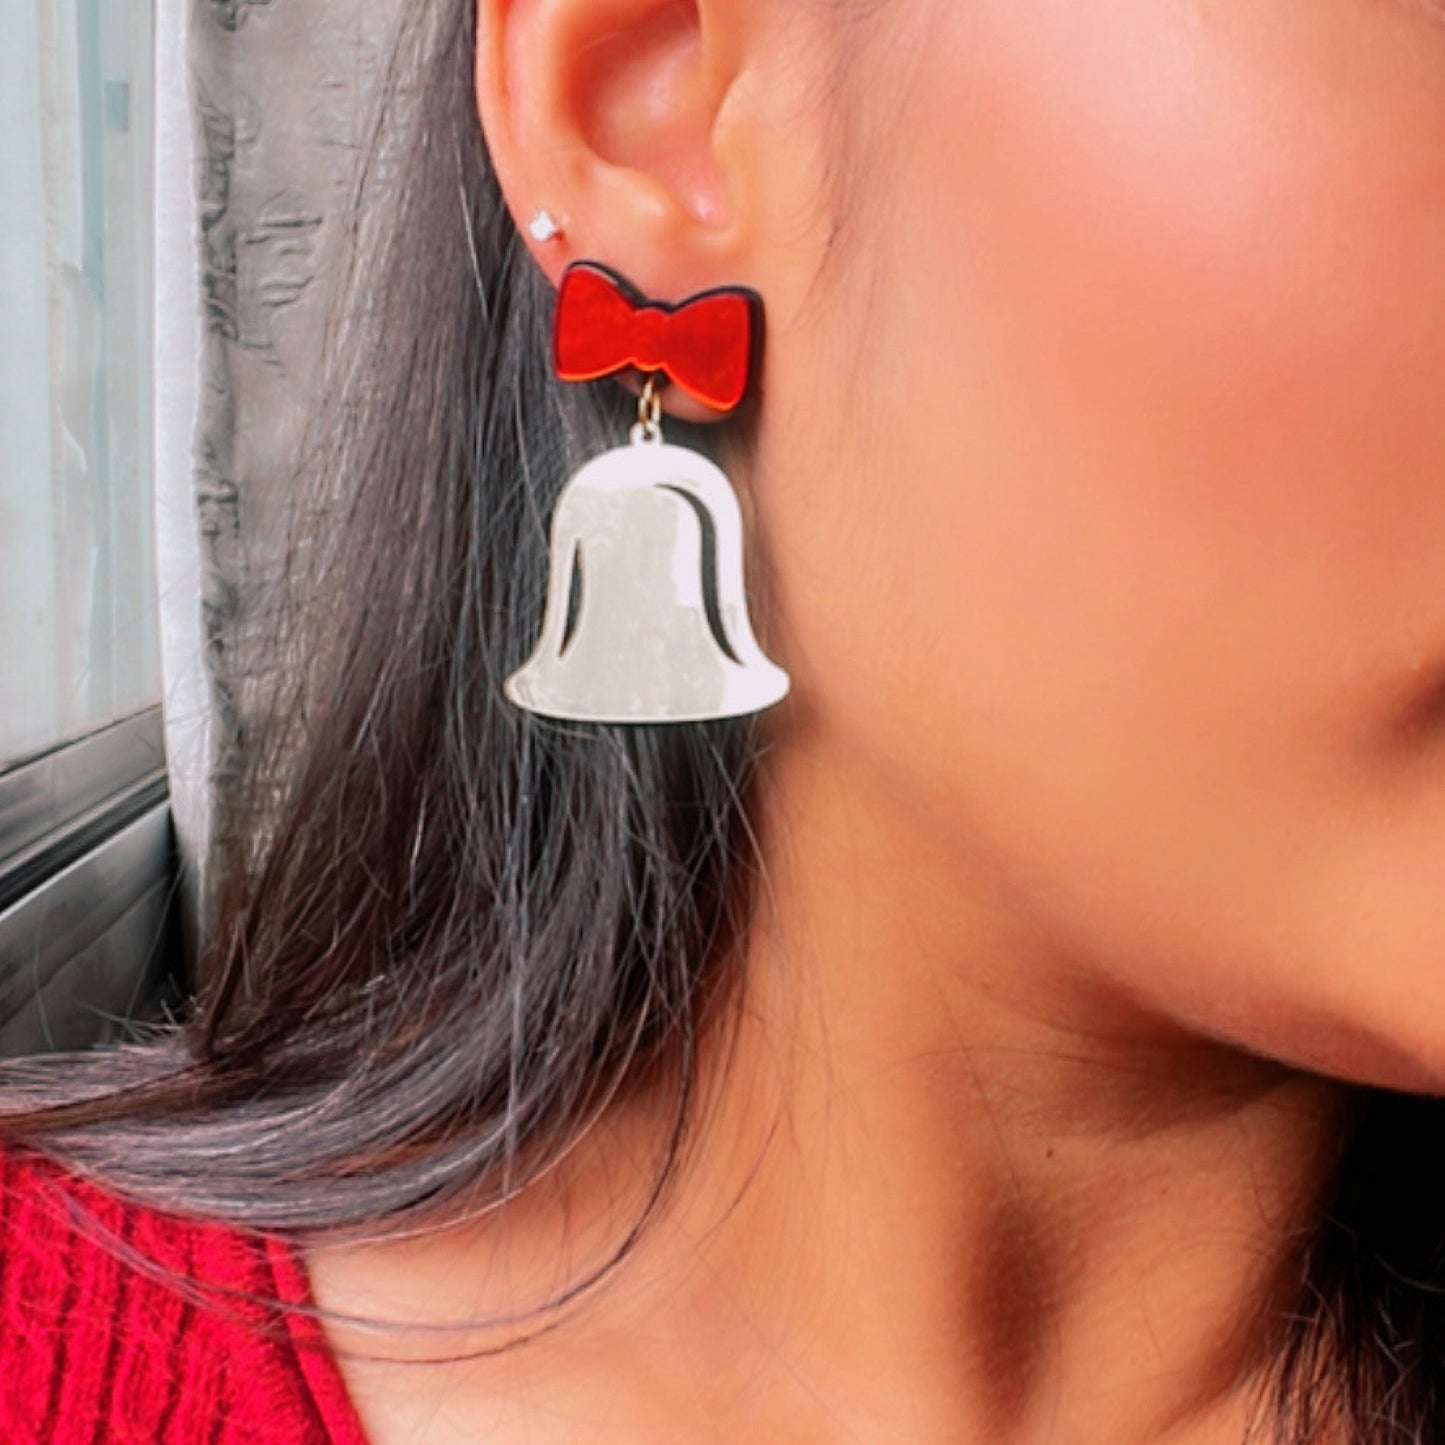 Jingle Bell Earrings - Red and Golden- Nian by Nidhi- worn by a woman